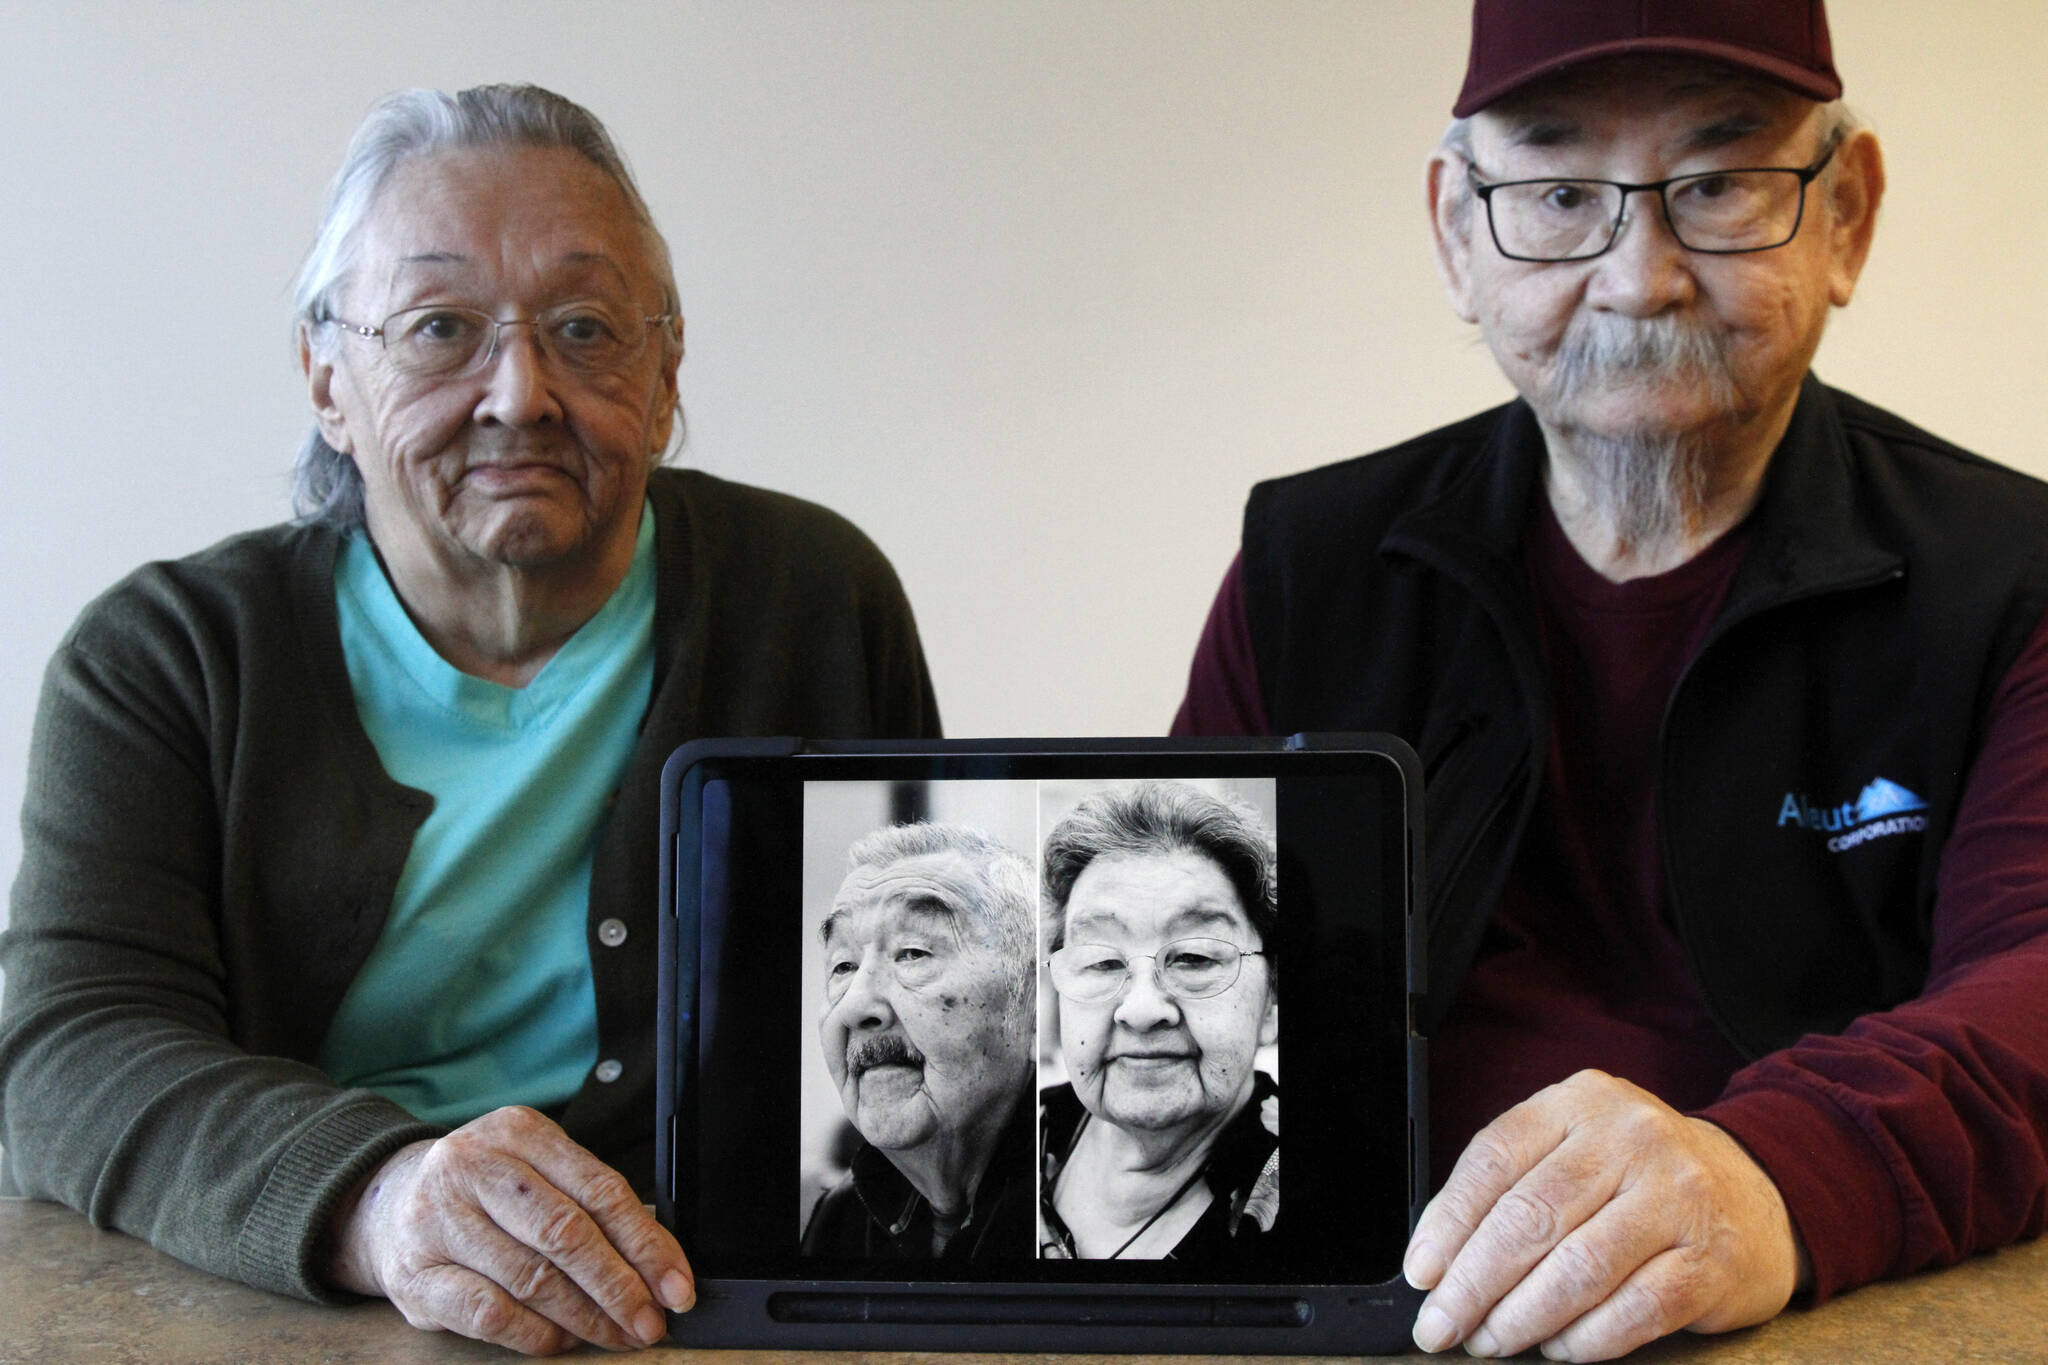 Pauline Golodoff, left, and George Kudrin hold an iPad featuring images of their deceased spouses, Gregory Golodoff and Elizabeth Golodoff Kurdrin, Friday, Dec. 1, 2023, in Anchorage, Alaska. Gregory and Elizabeth were the last two living residents of Attu, Alaska, whose entire population was captured by the Japanese during World War II and sent to Japan until being liberated after the war. The community of Attu was not rebuilt, and residents were resettled elsewhere, mostly in Atka, Alaska. (AP Photo/Mark Thiessen)